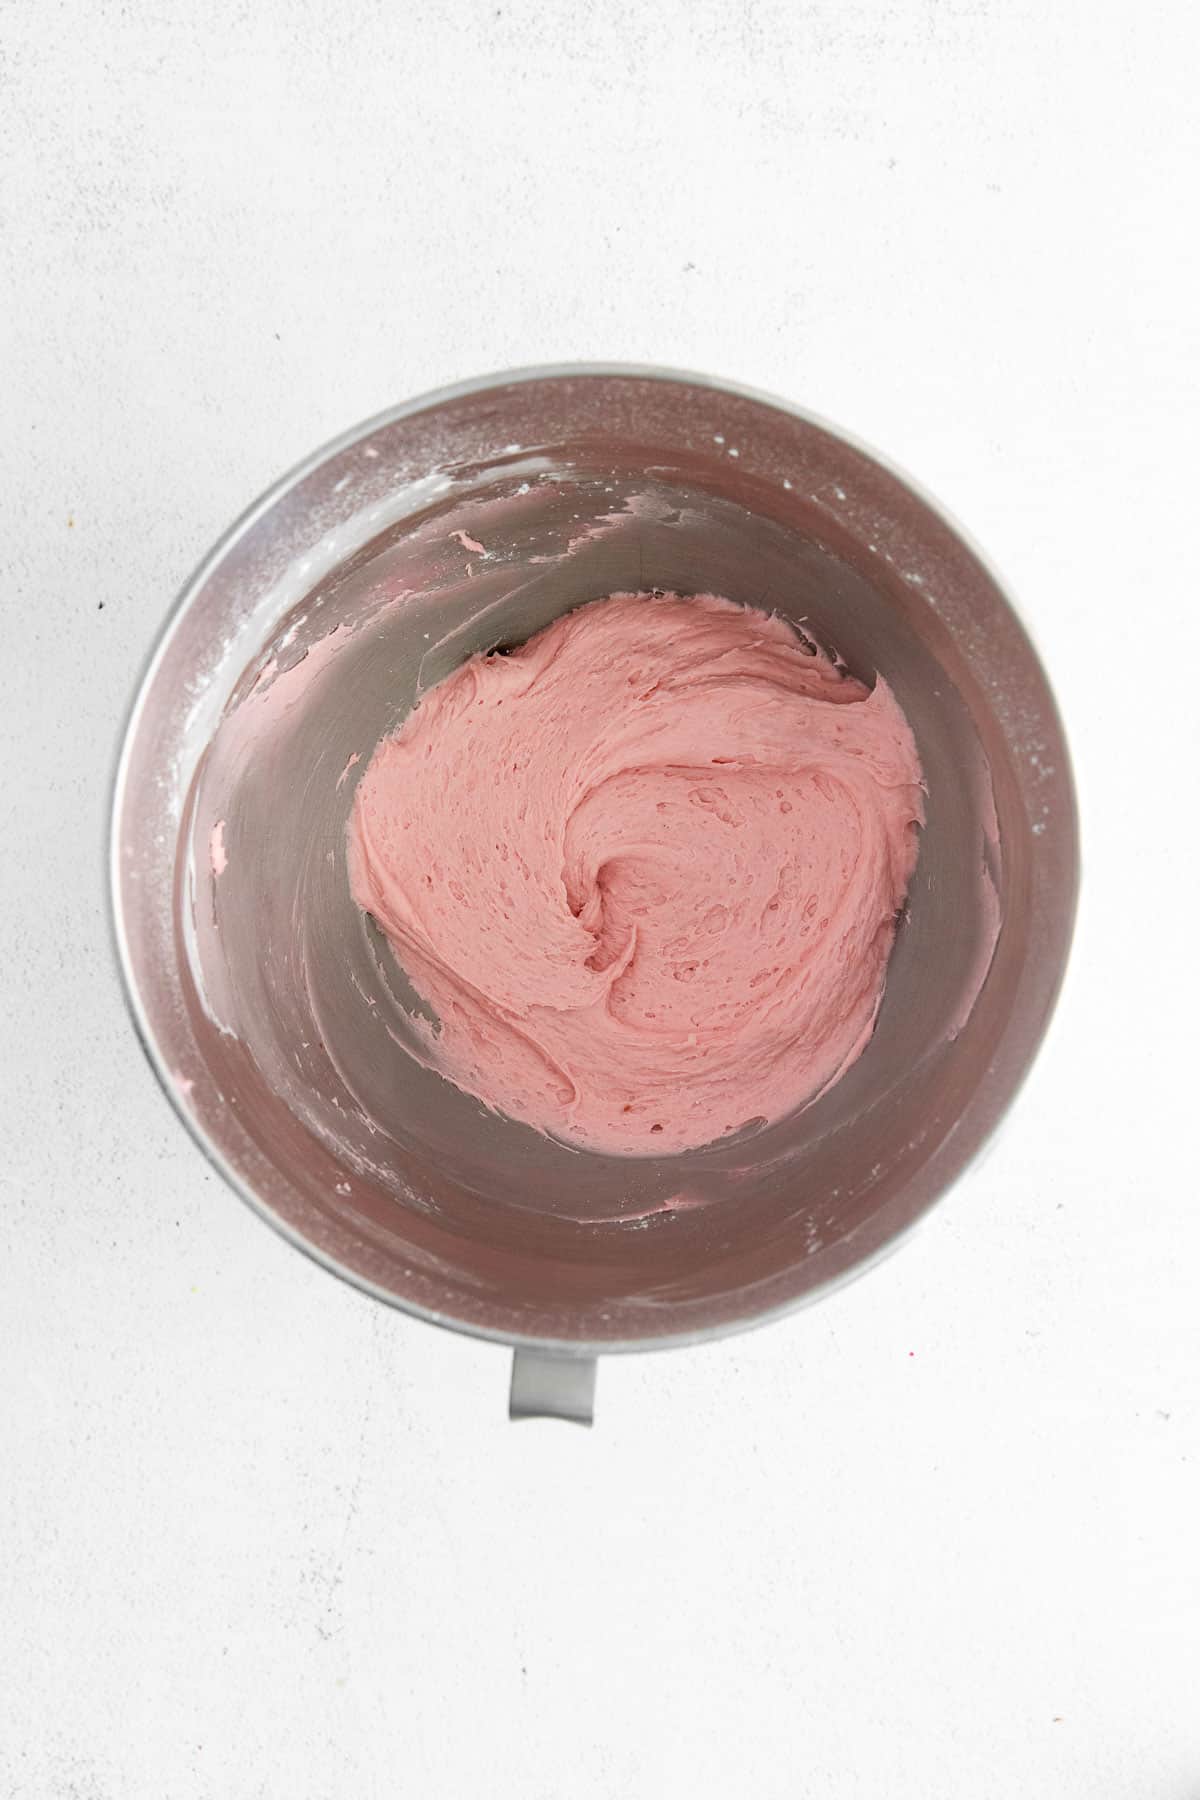 buttercream frosting in a metal bowl.